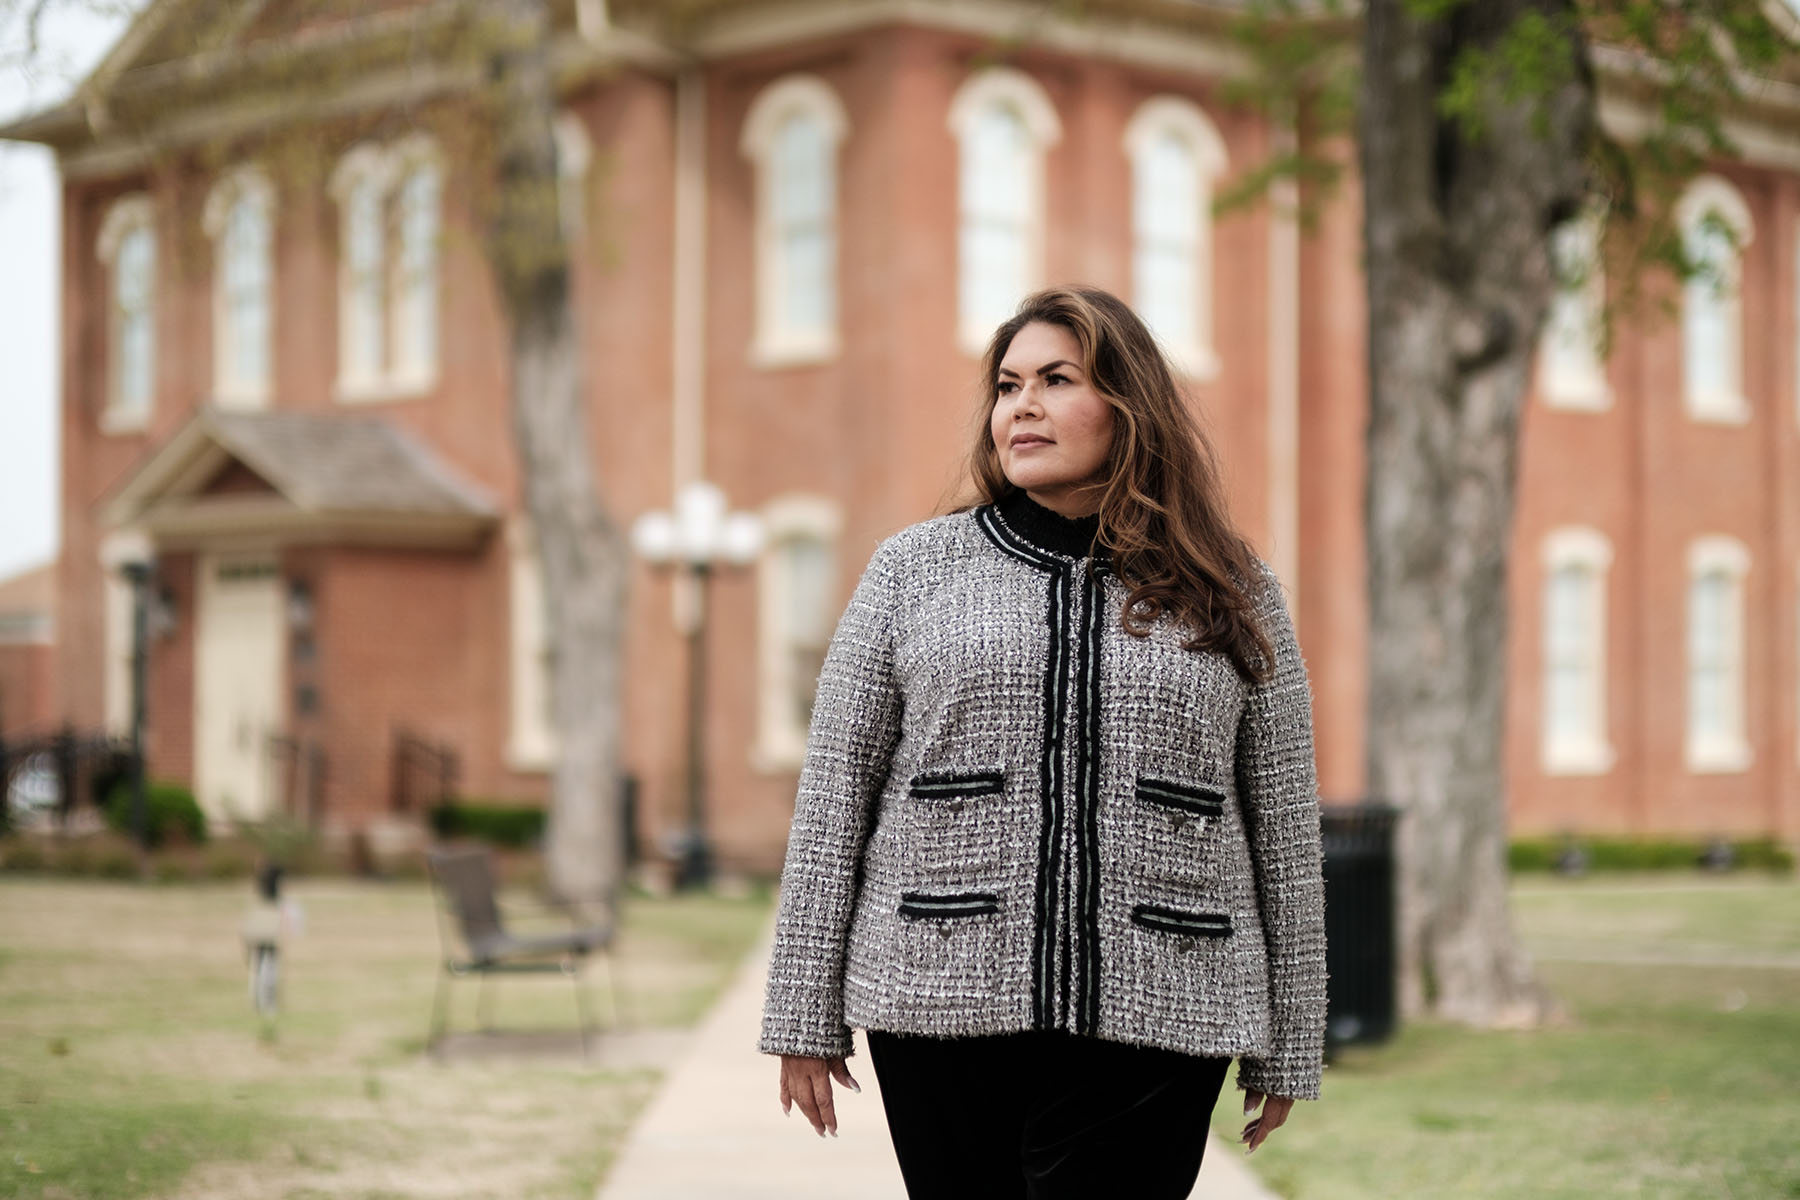 Kimberly Teehee poses for a portrait in front of the Cherokee National History Museum in Talequah, Oklahoma in April 2023.